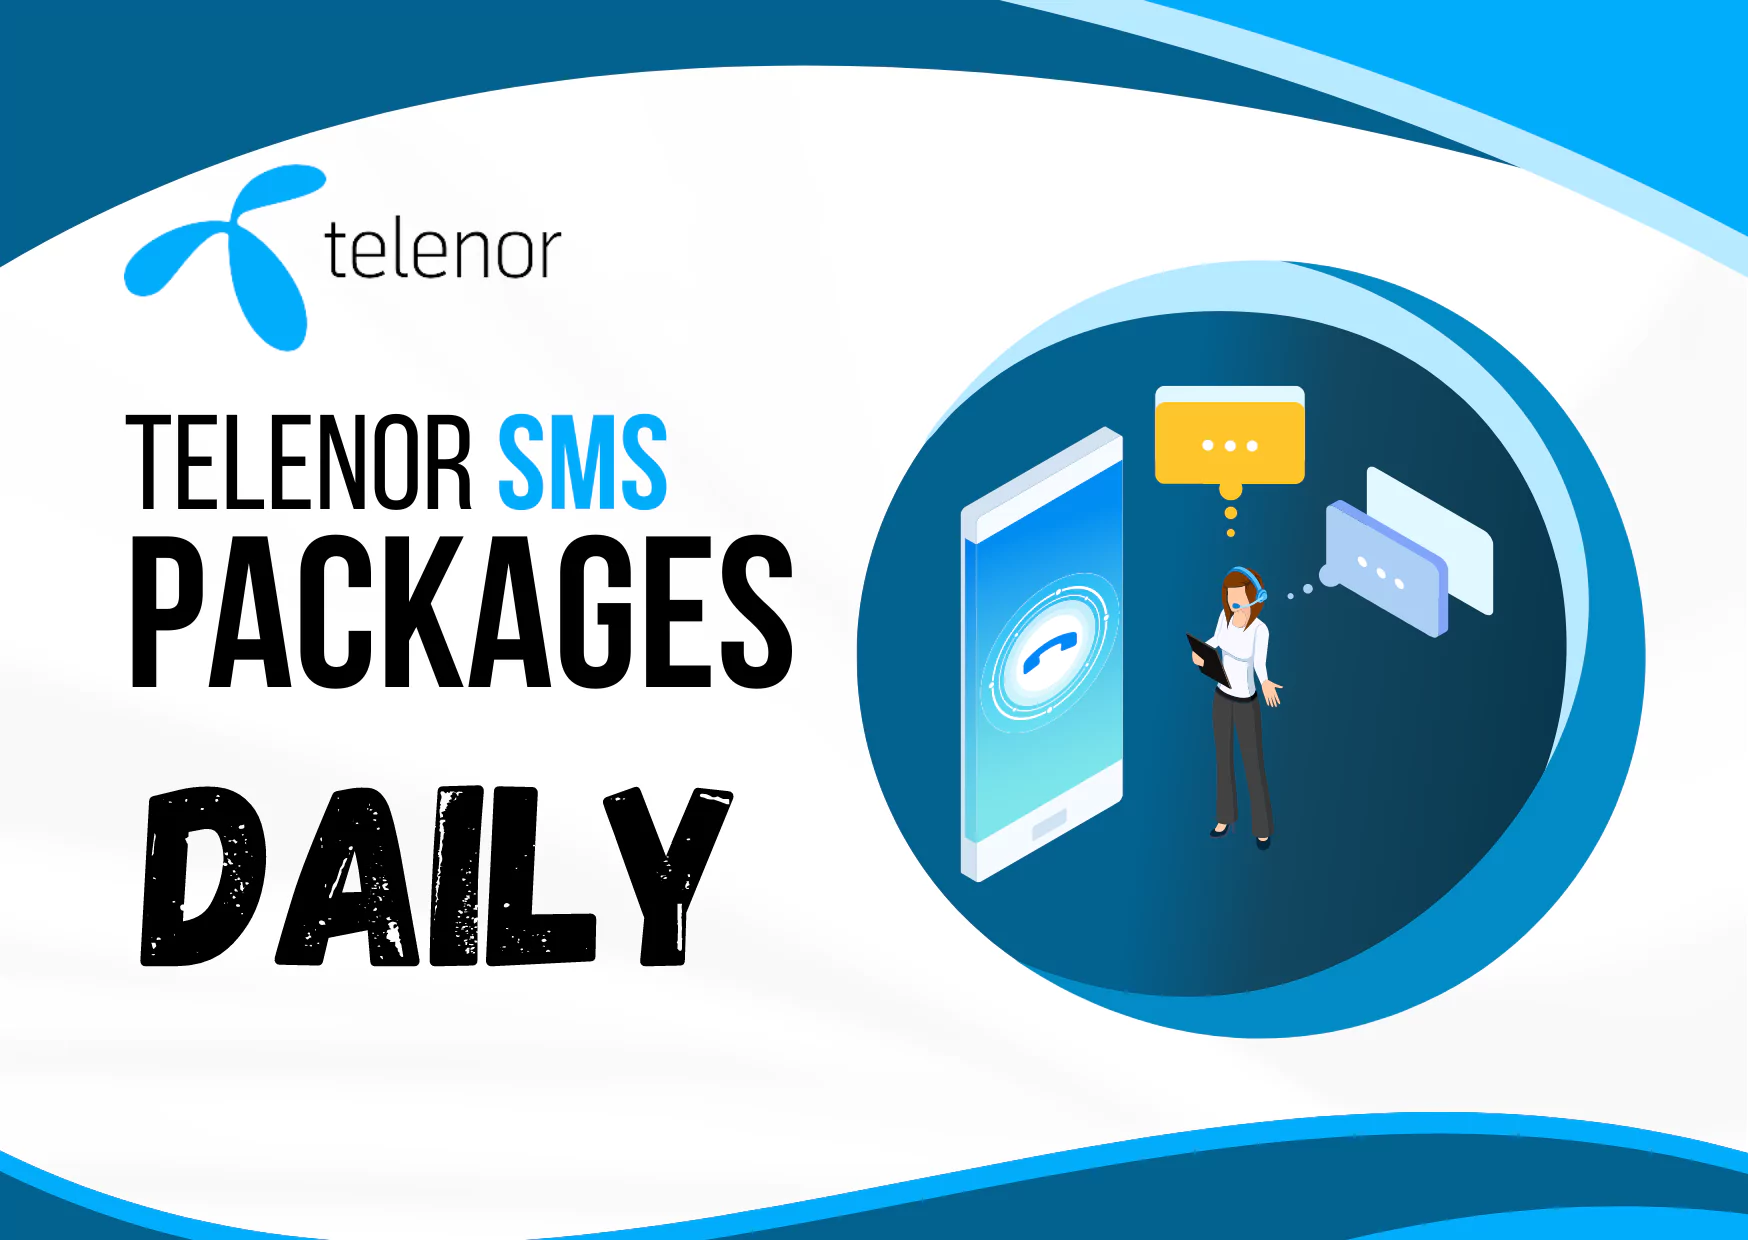 telenor sms package code